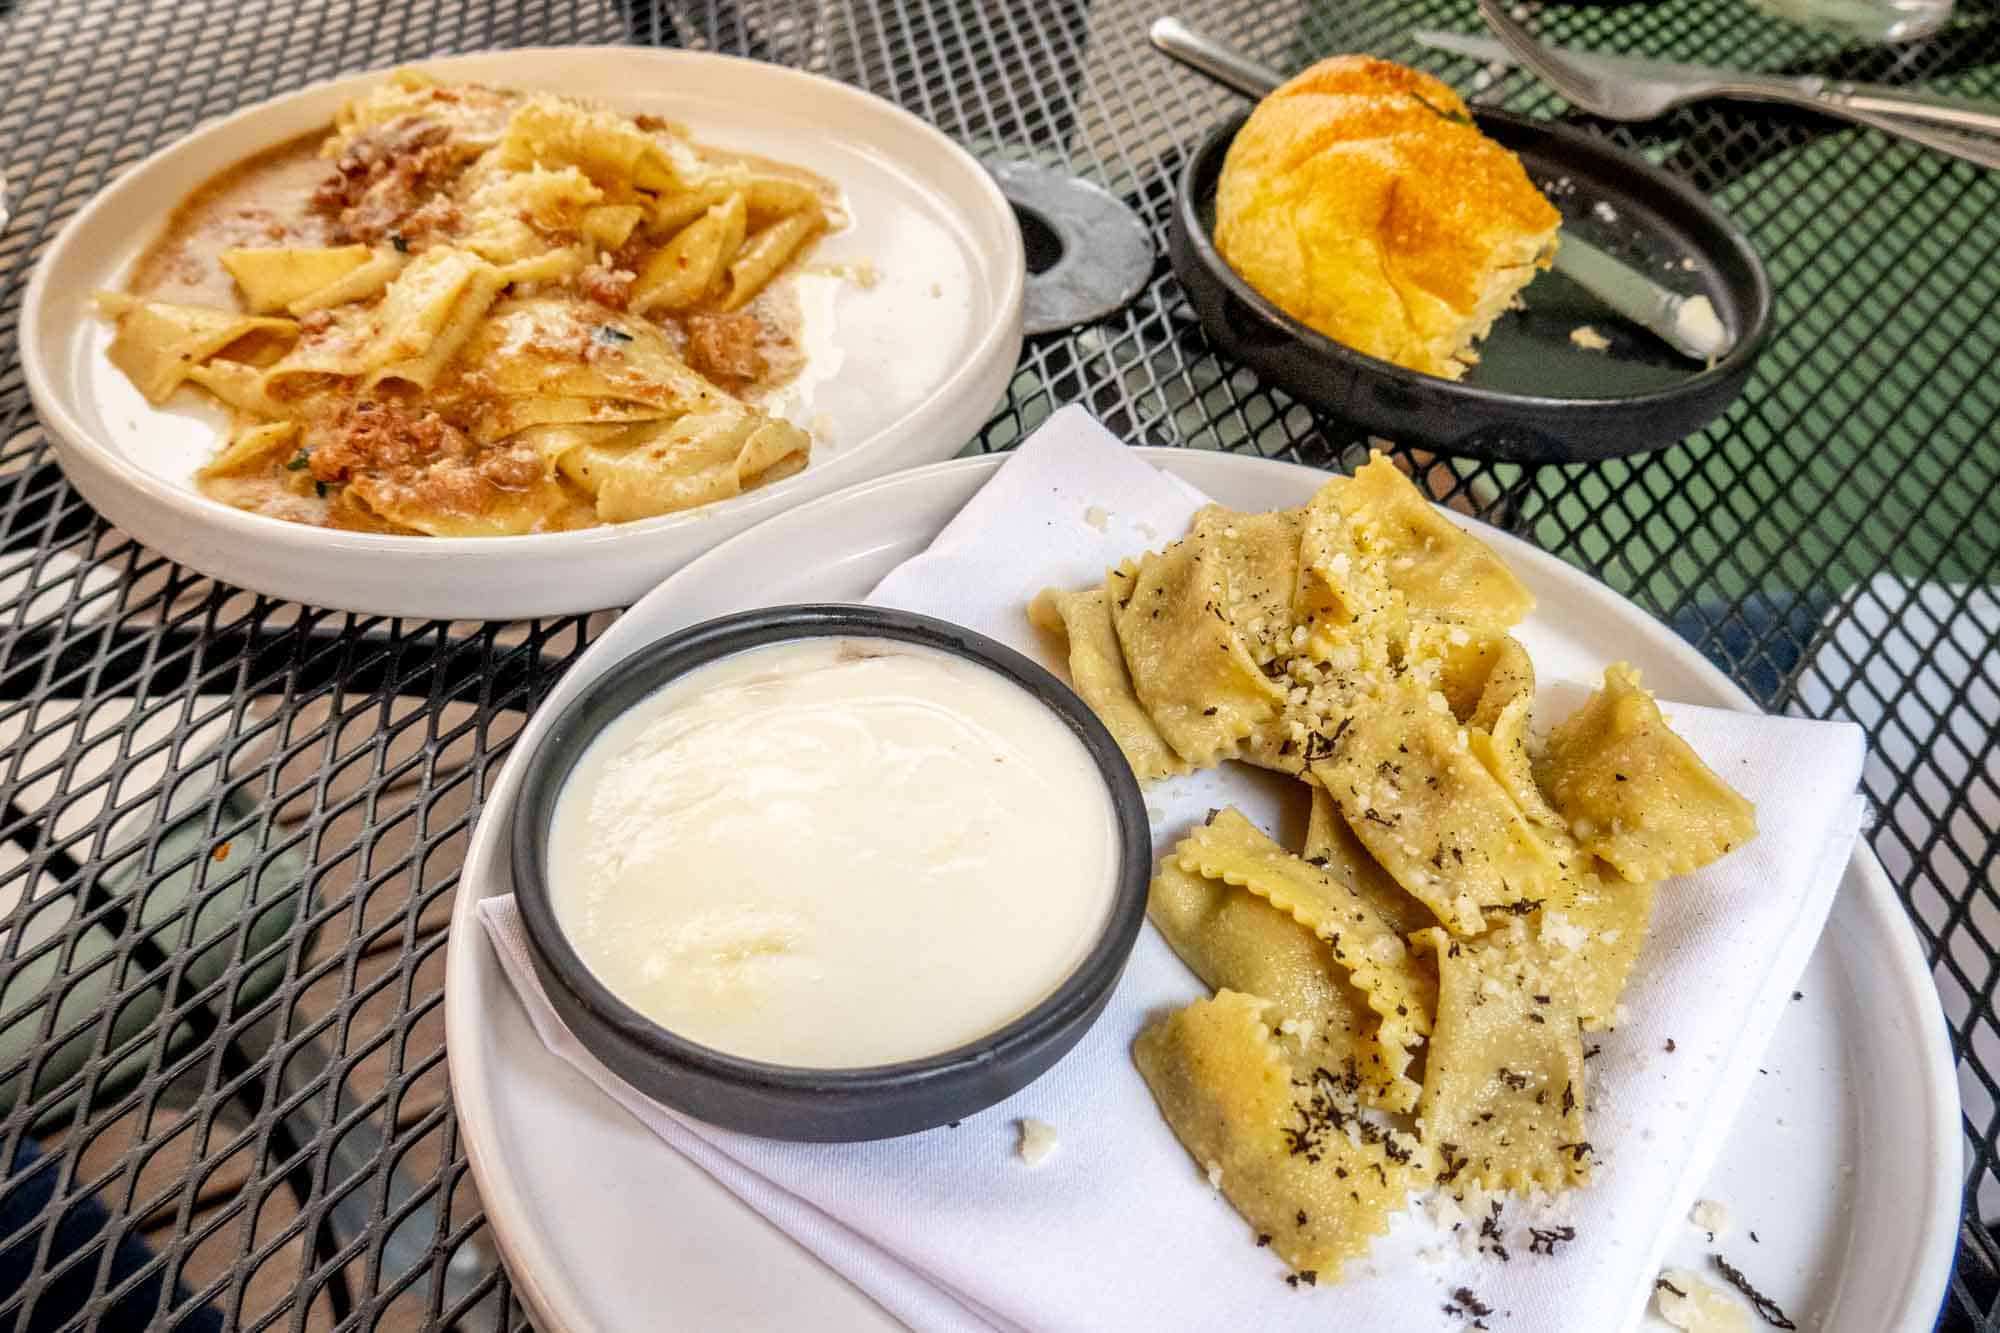 Plates of pasta and bread on a table outdoors